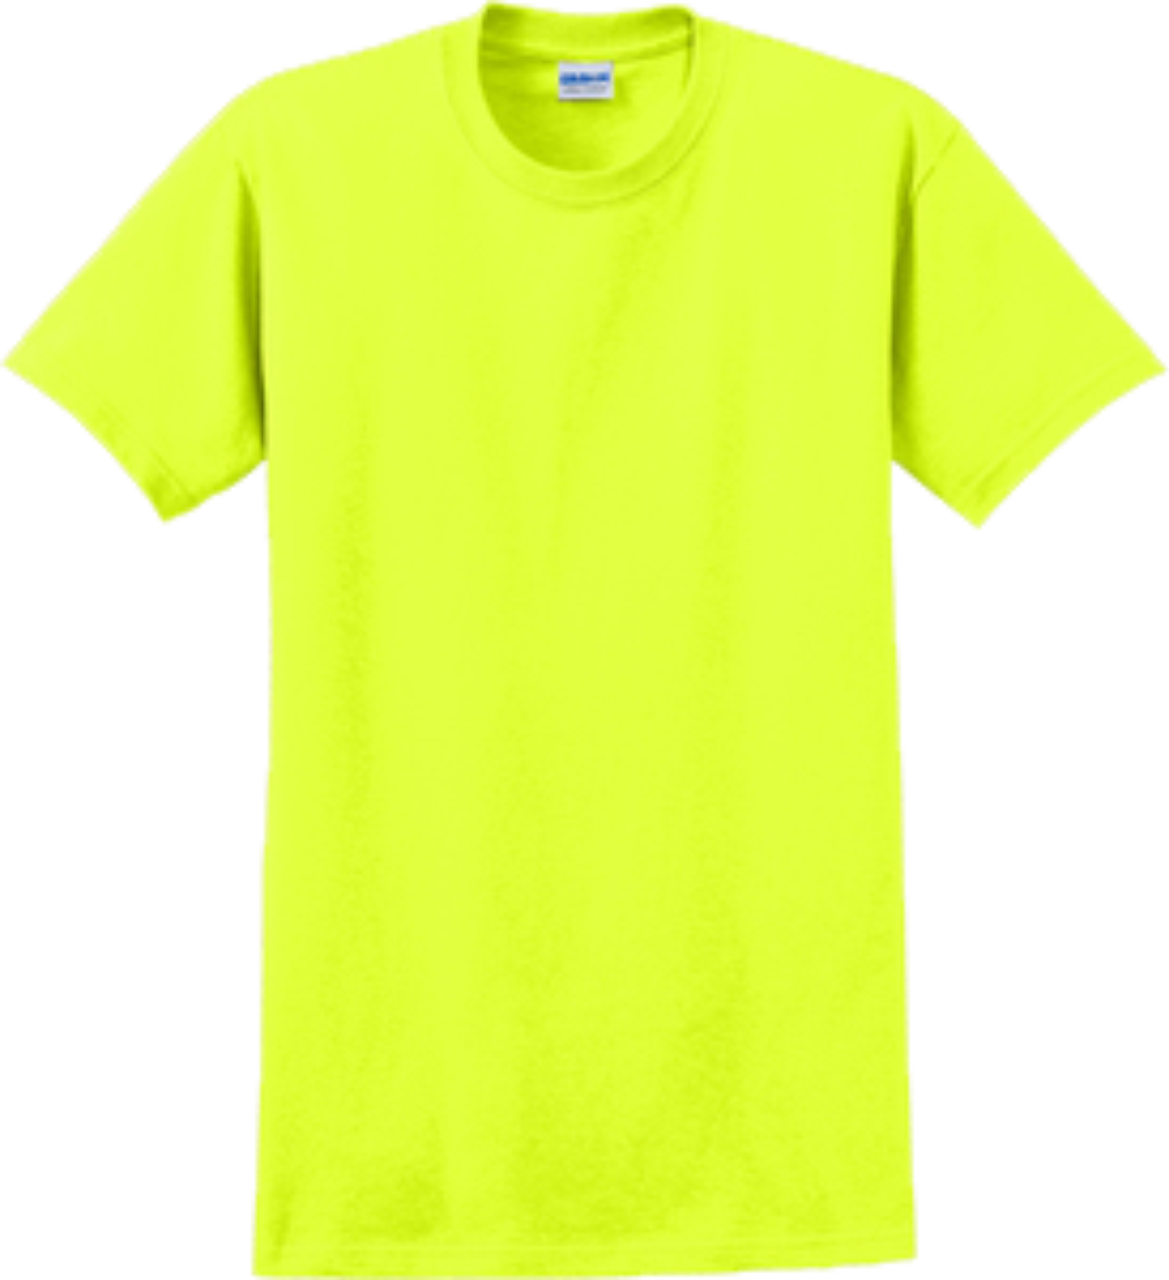 Short Sleeves T-Shirt Background PNG Image